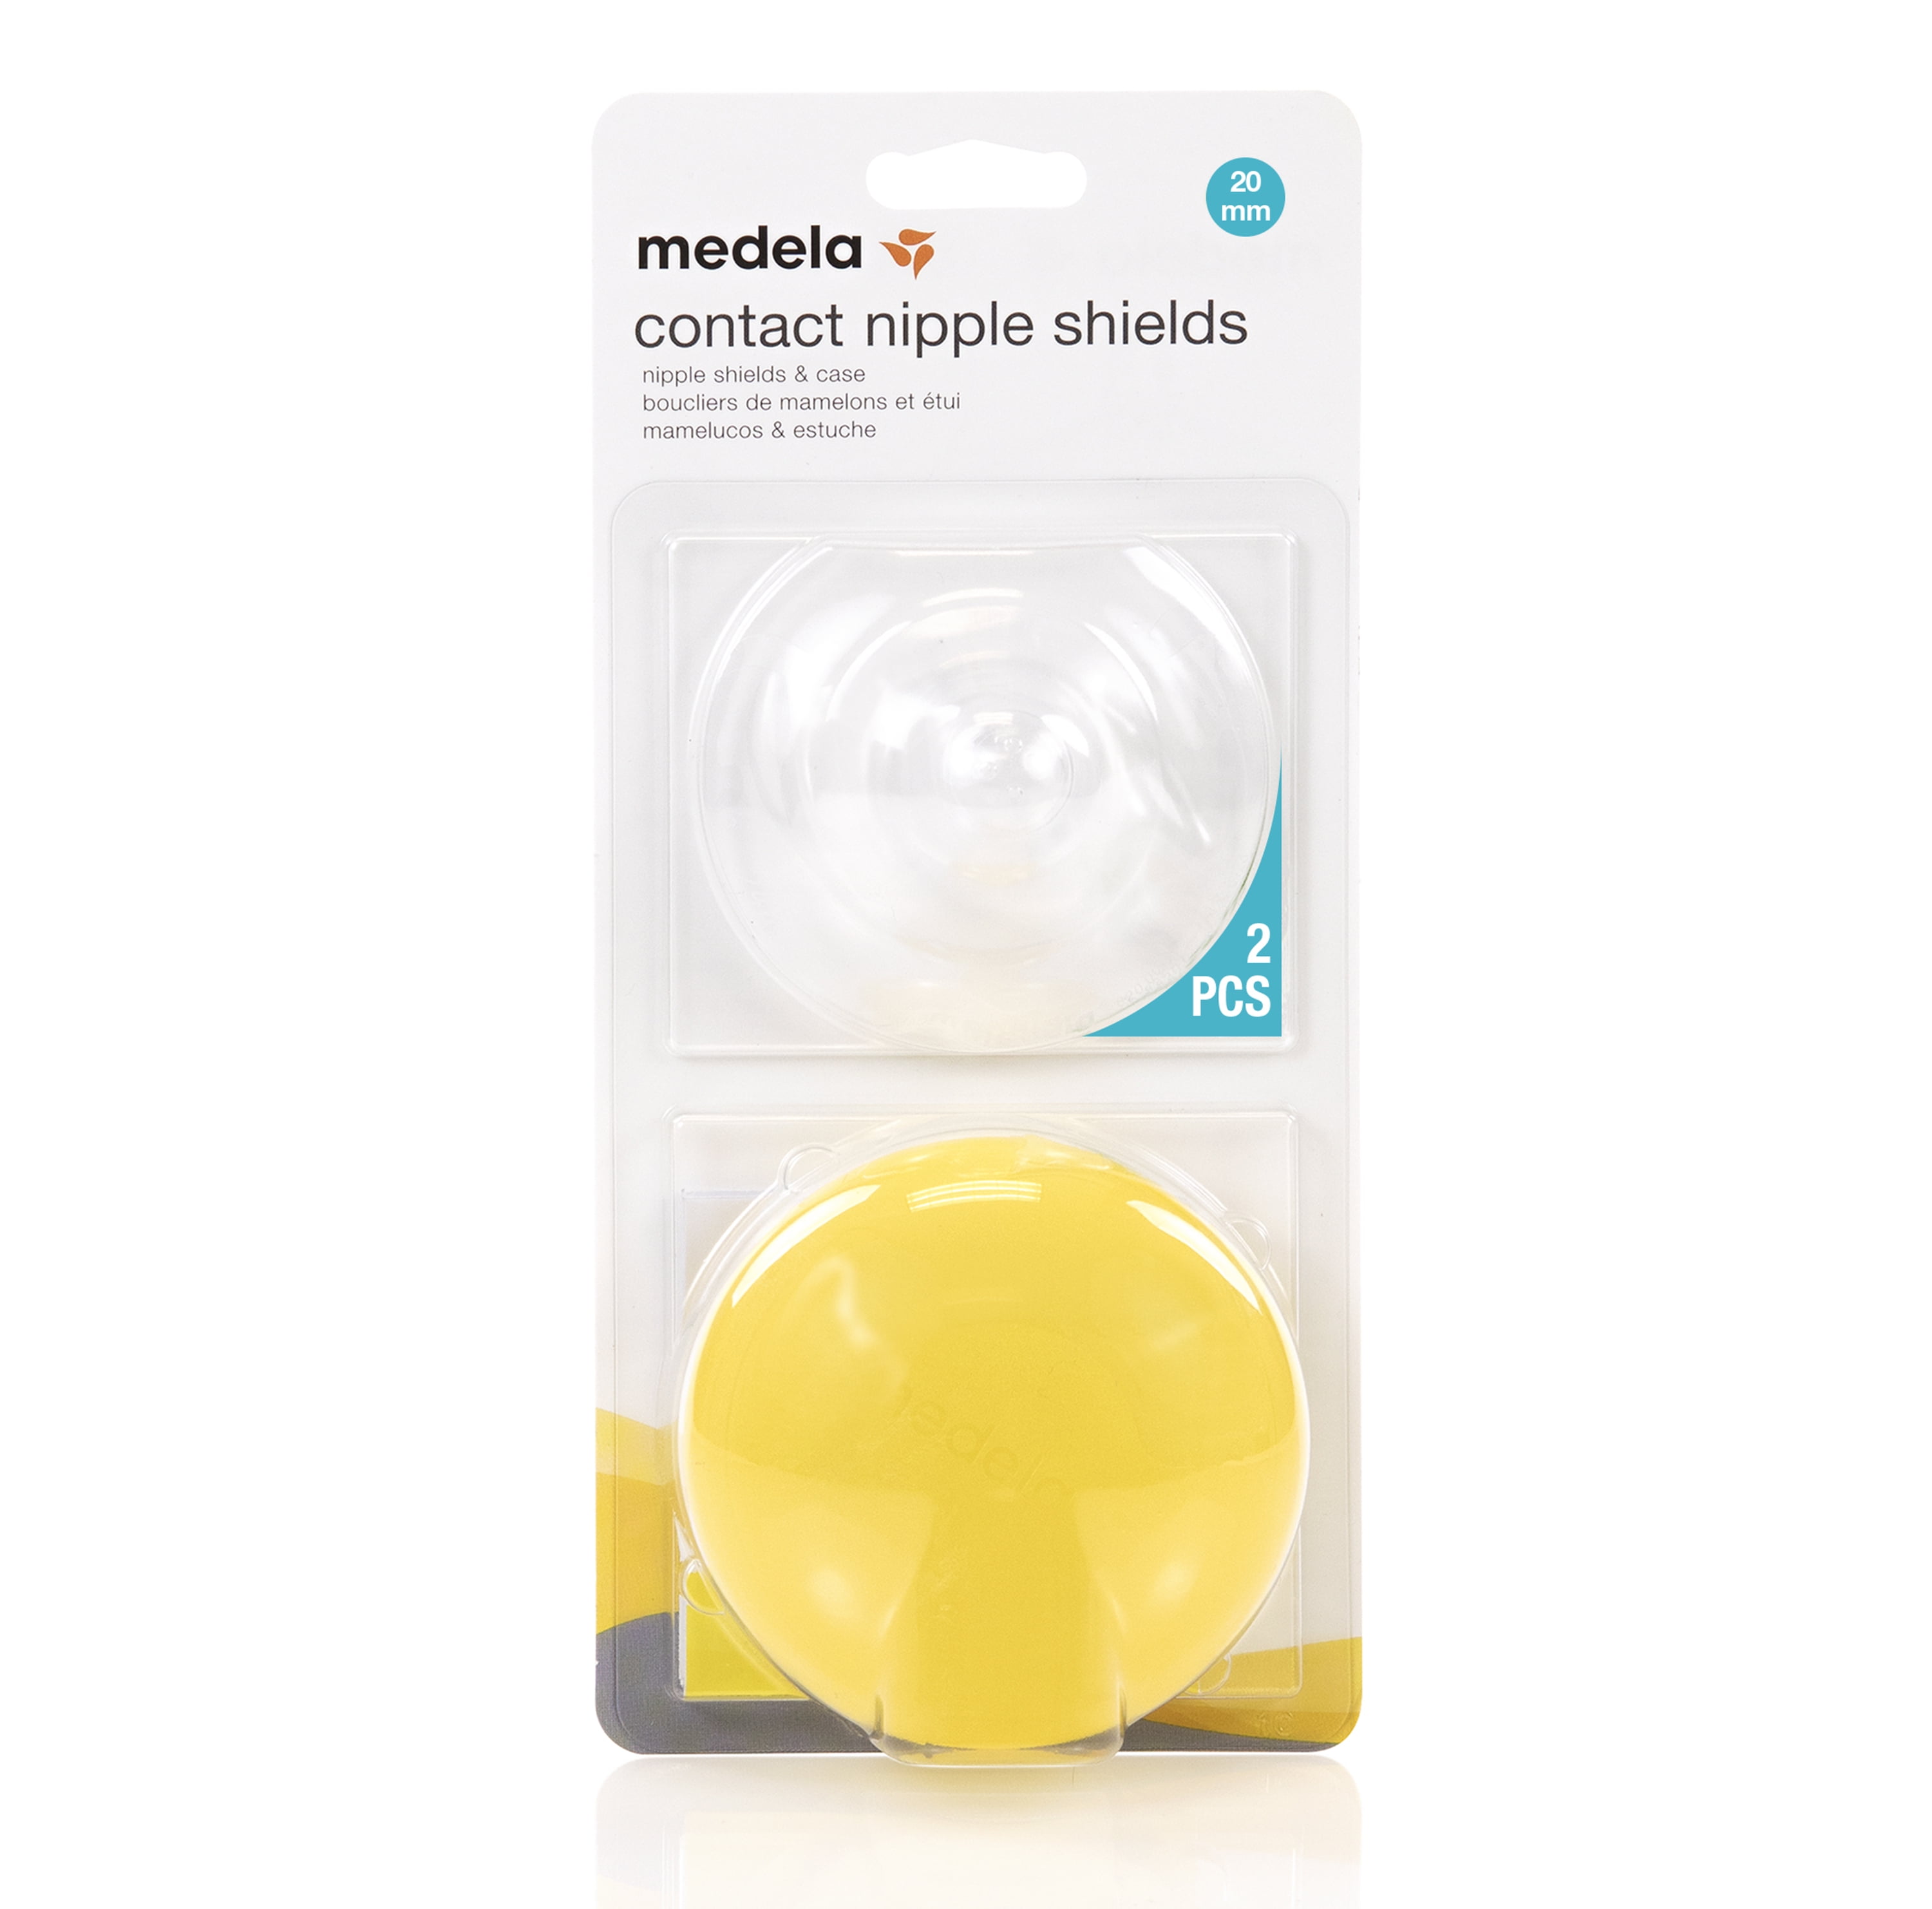 New in Box 4 Shields Medela Contact Nipple Shields 2 Protective Case 24mm 